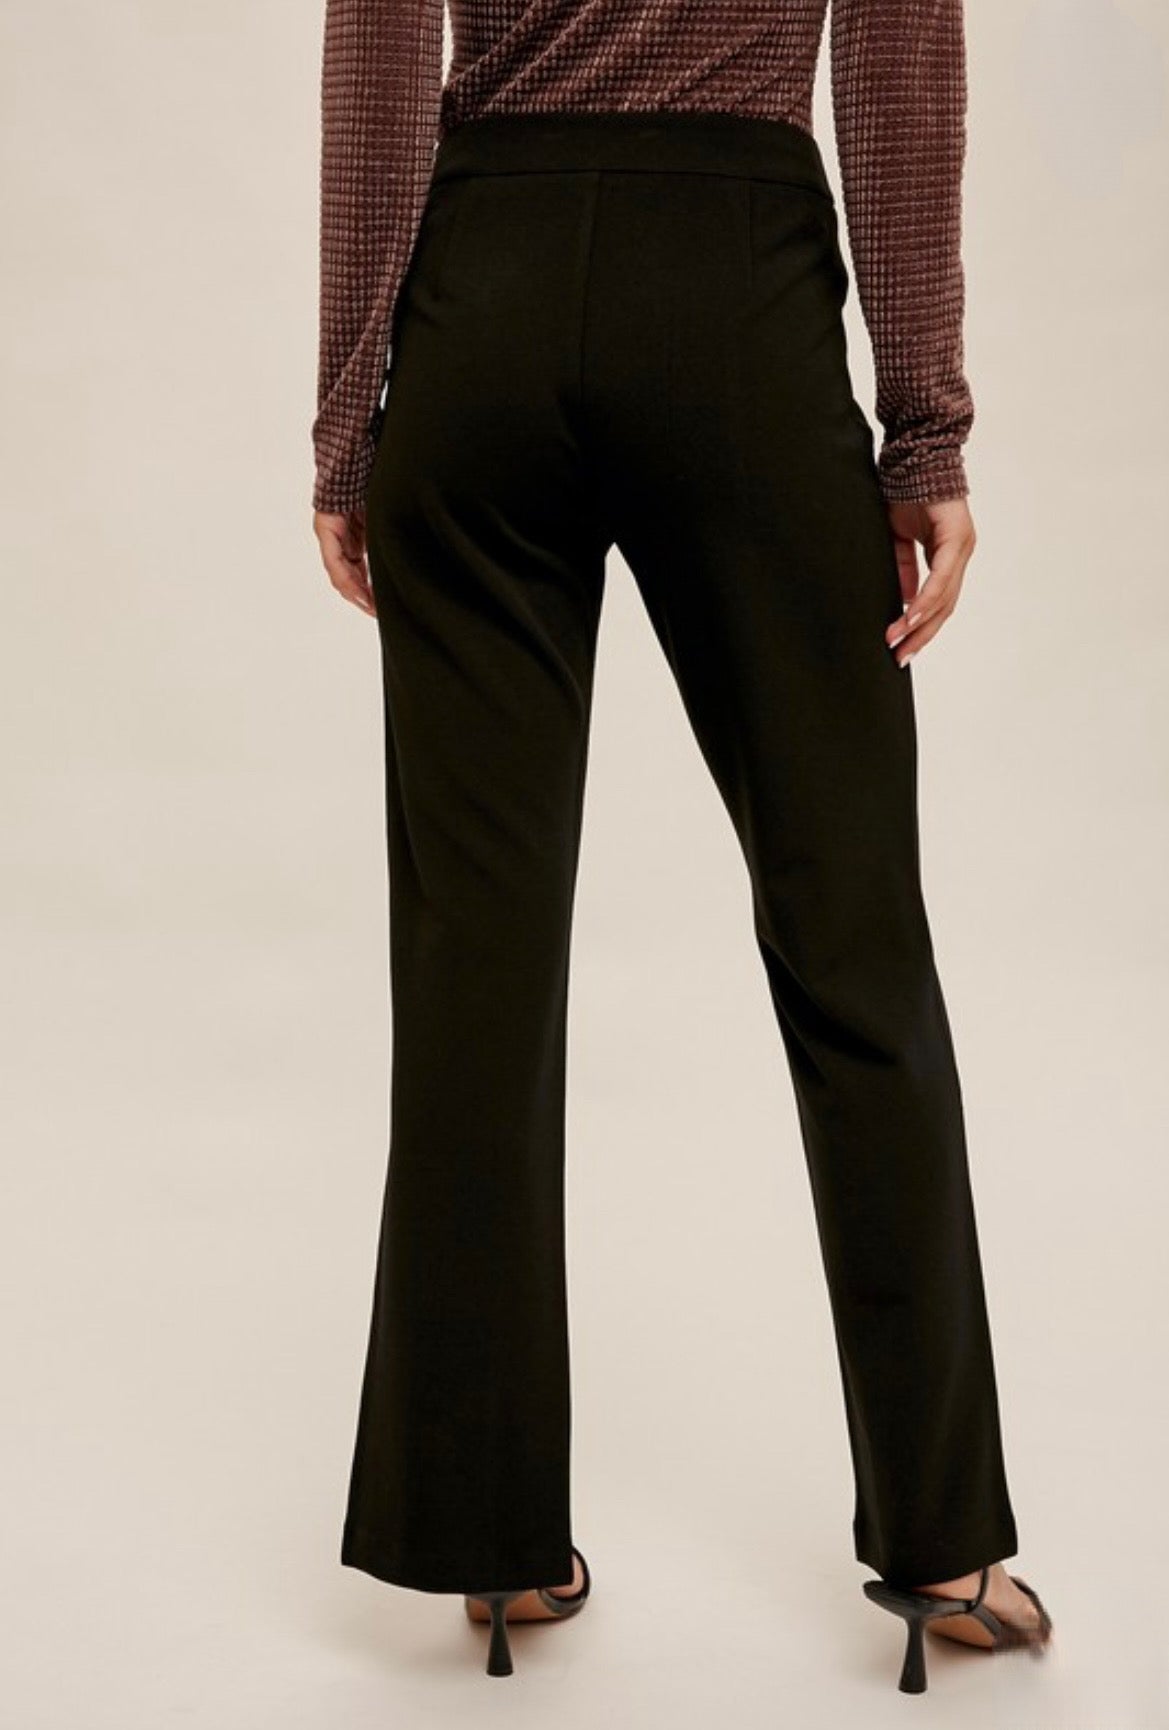 Knit Pant with Front Slit